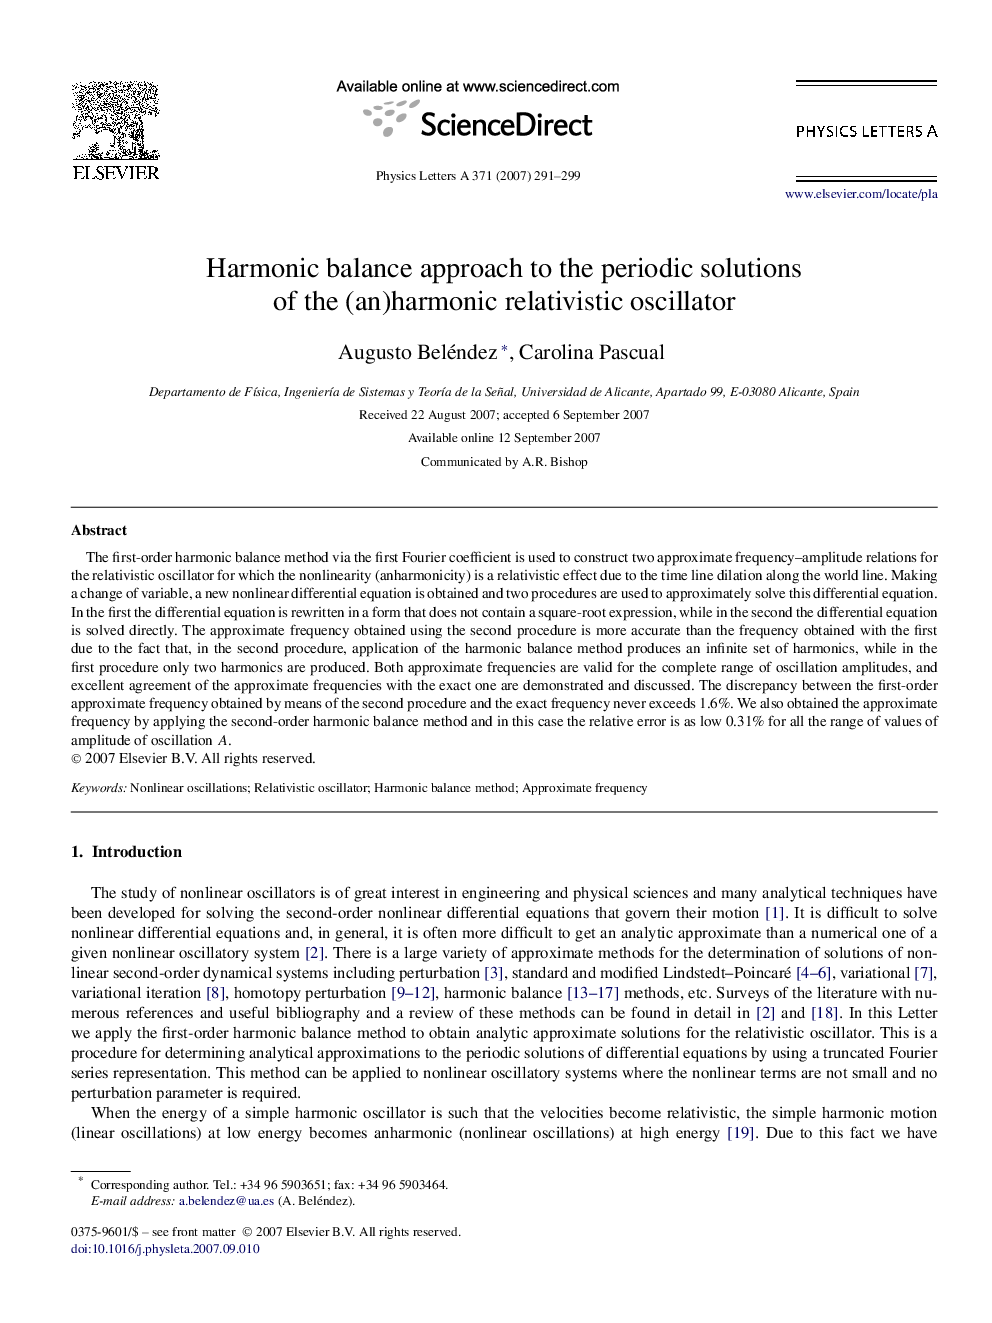 Harmonic balance approach to the periodic solutions of the (an)harmonic relativistic oscillator